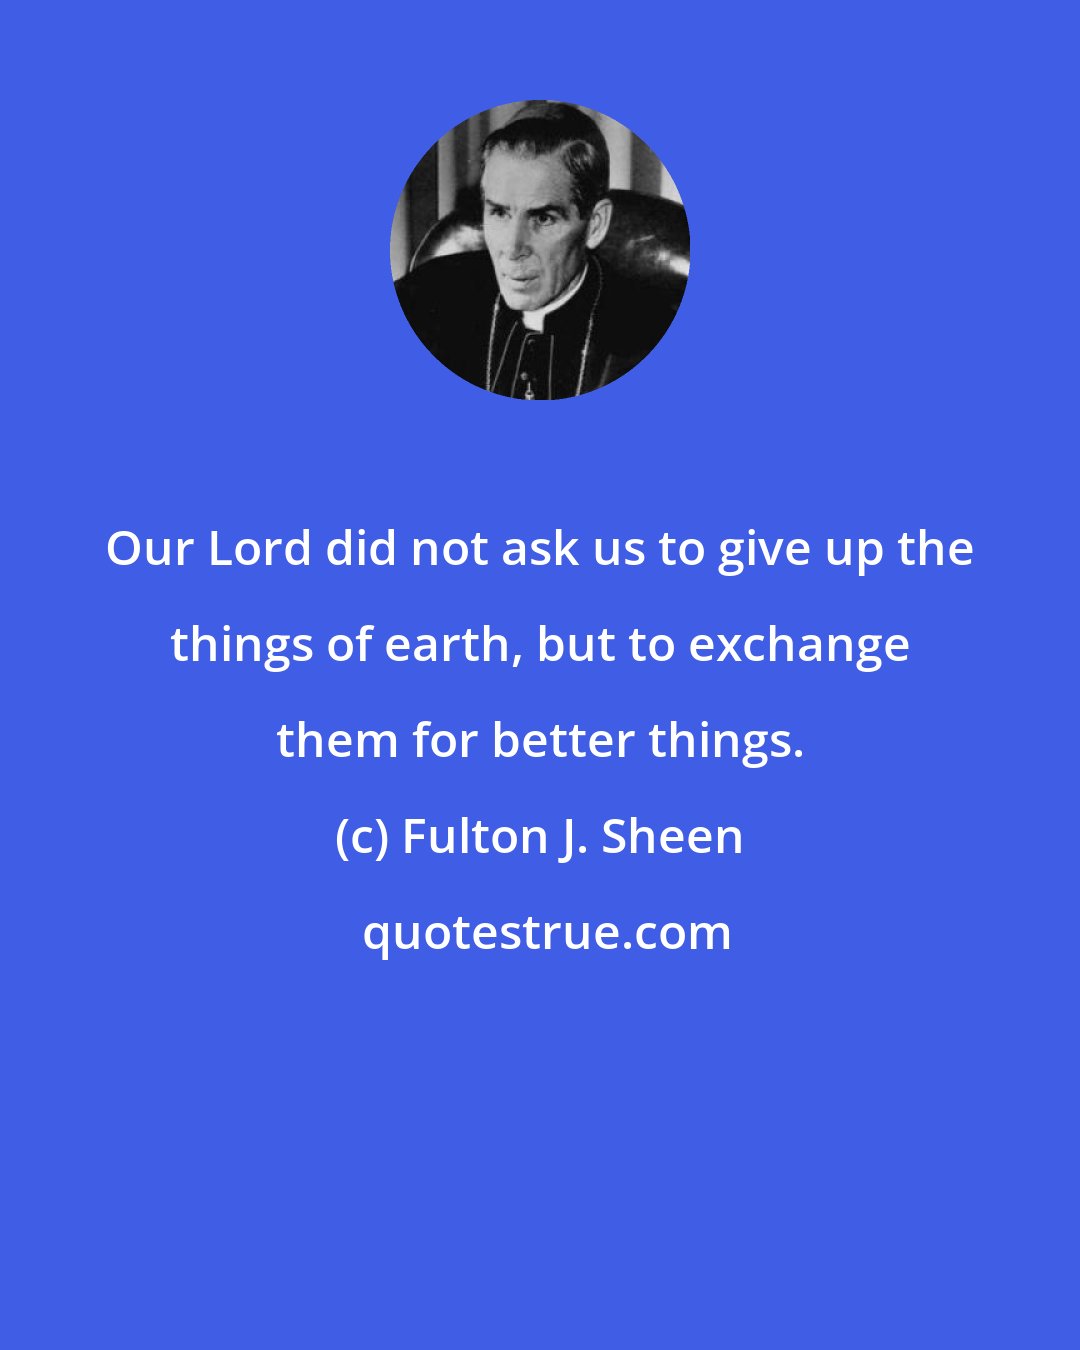 Fulton J. Sheen: Our Lord did not ask us to give up the things of earth, but to exchange them for better things.